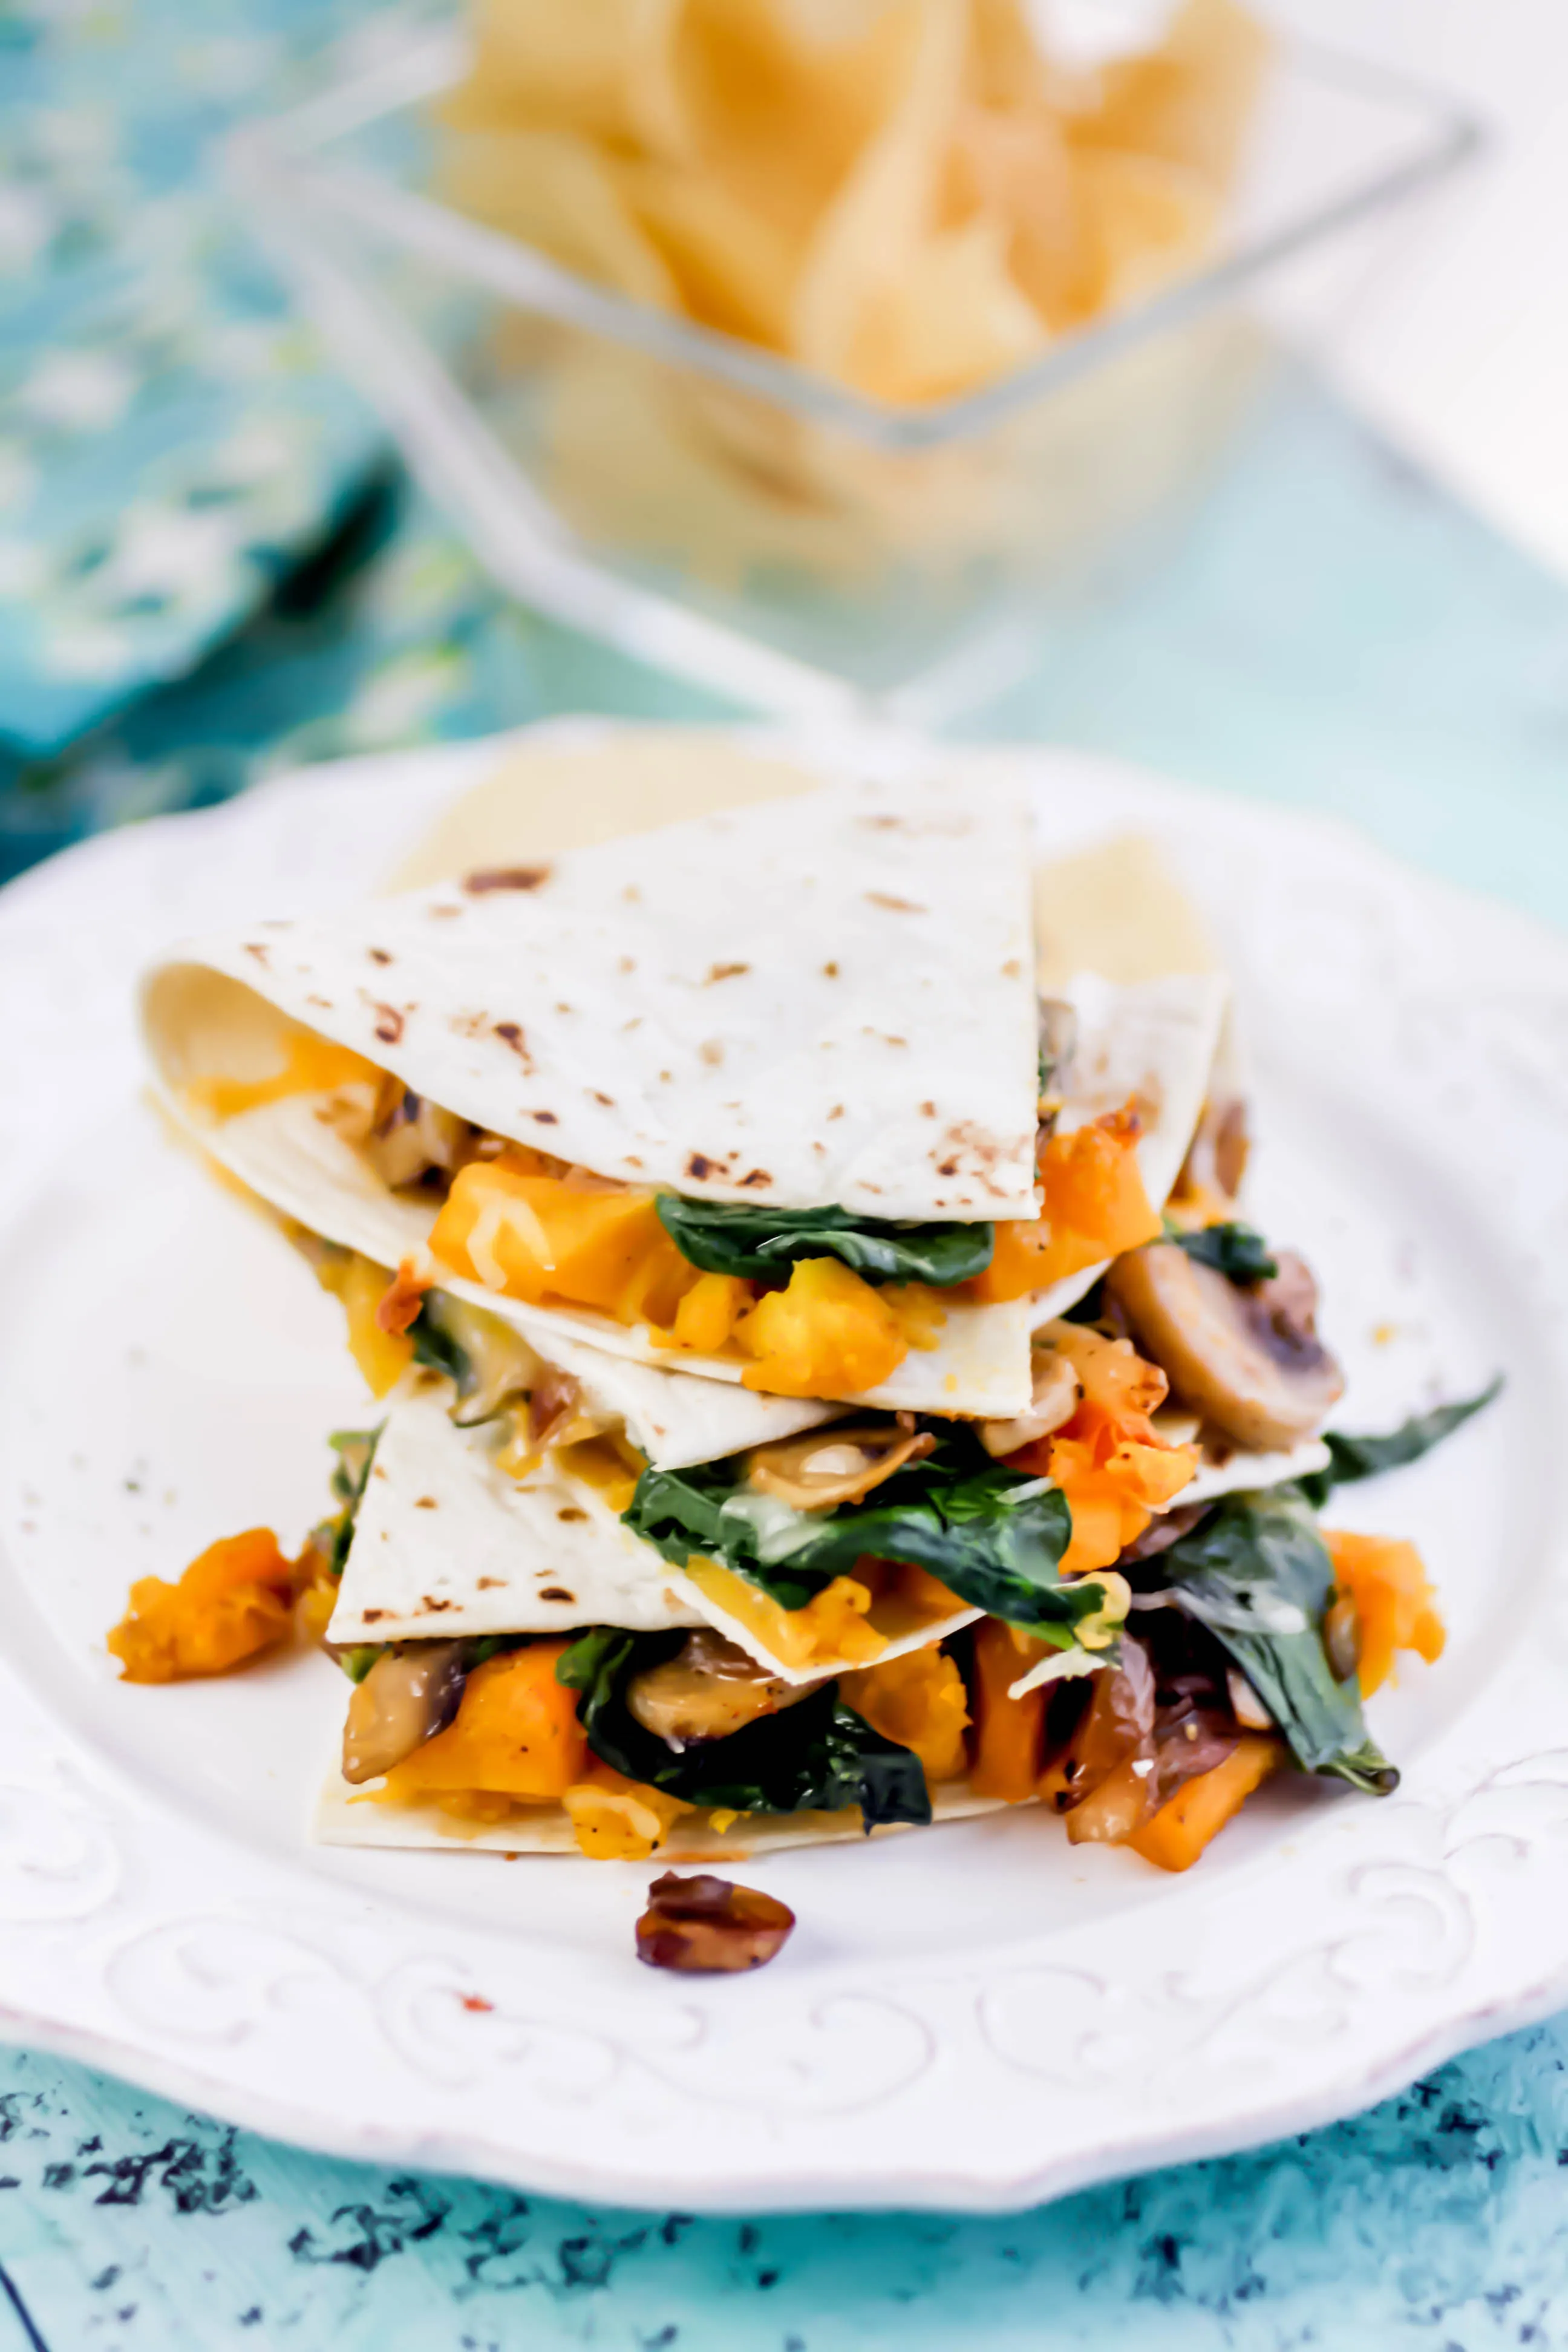 Butternut Squash, Mushroom, Onion, and Spinach Quesadillas are filling and delightful for any dinnertime menu! Butternut Squash, Mushroom, Onion, and Spinach Quesadillas are loaded with great ingredients for a tasty meal!